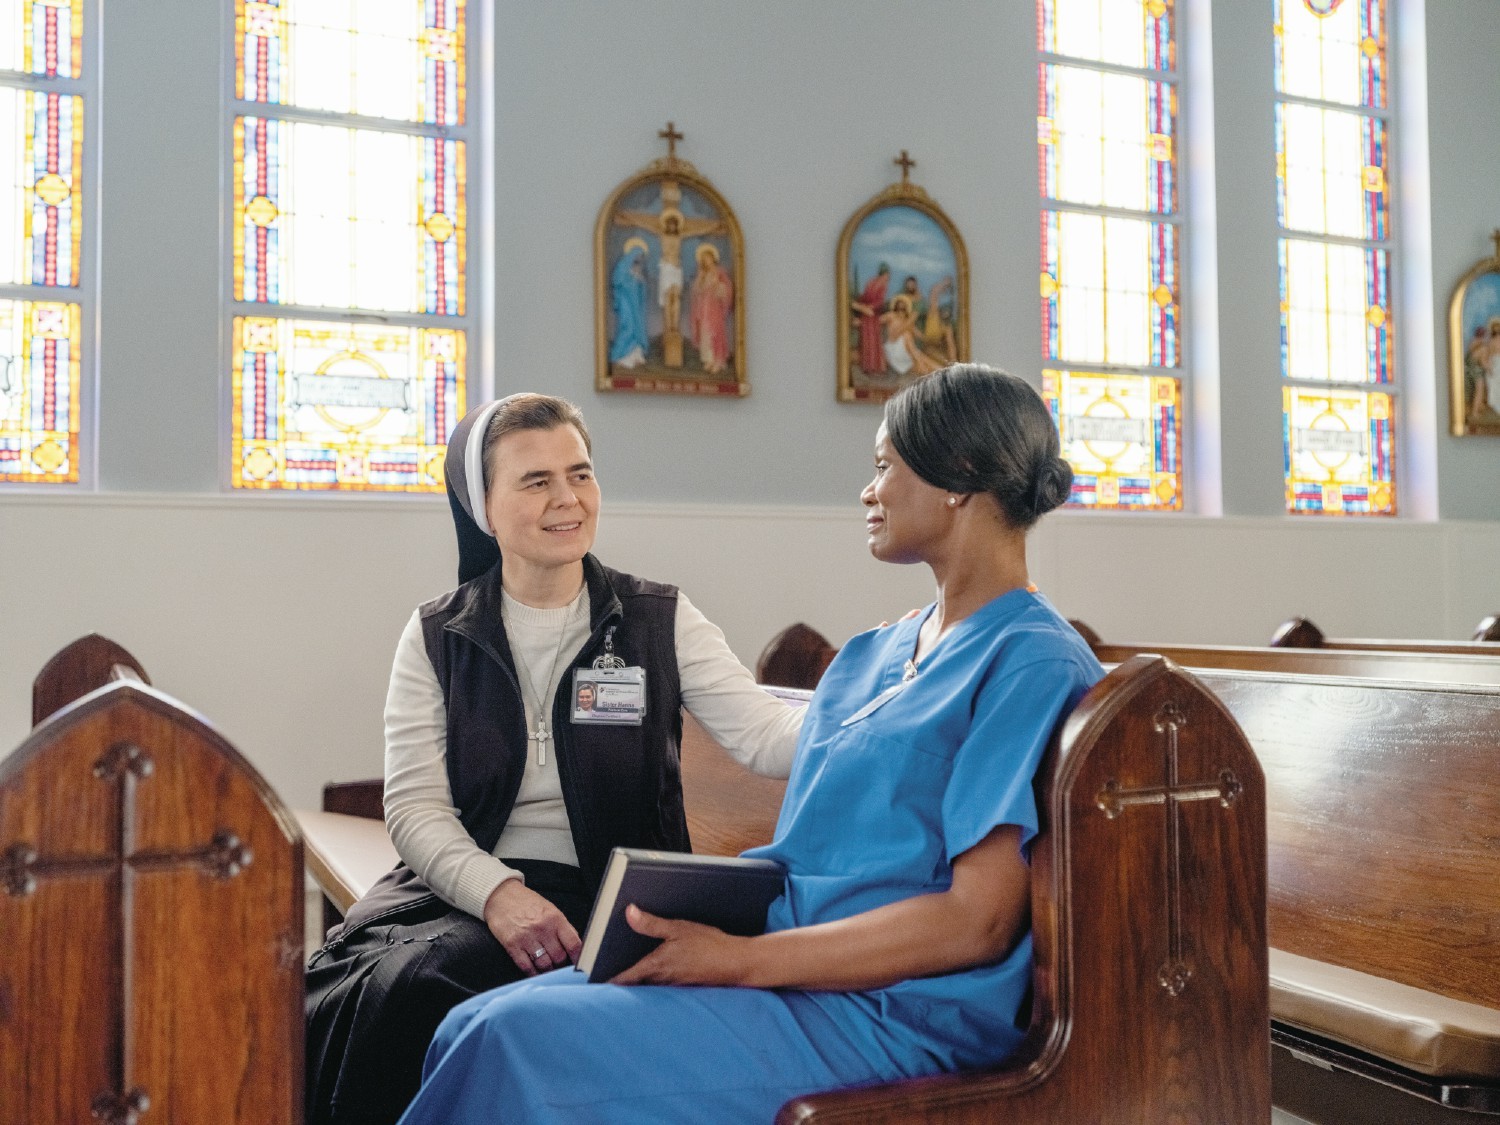 CHRISTUS Health is a Catholic, not-for-profit health system dedicated to serving the community.